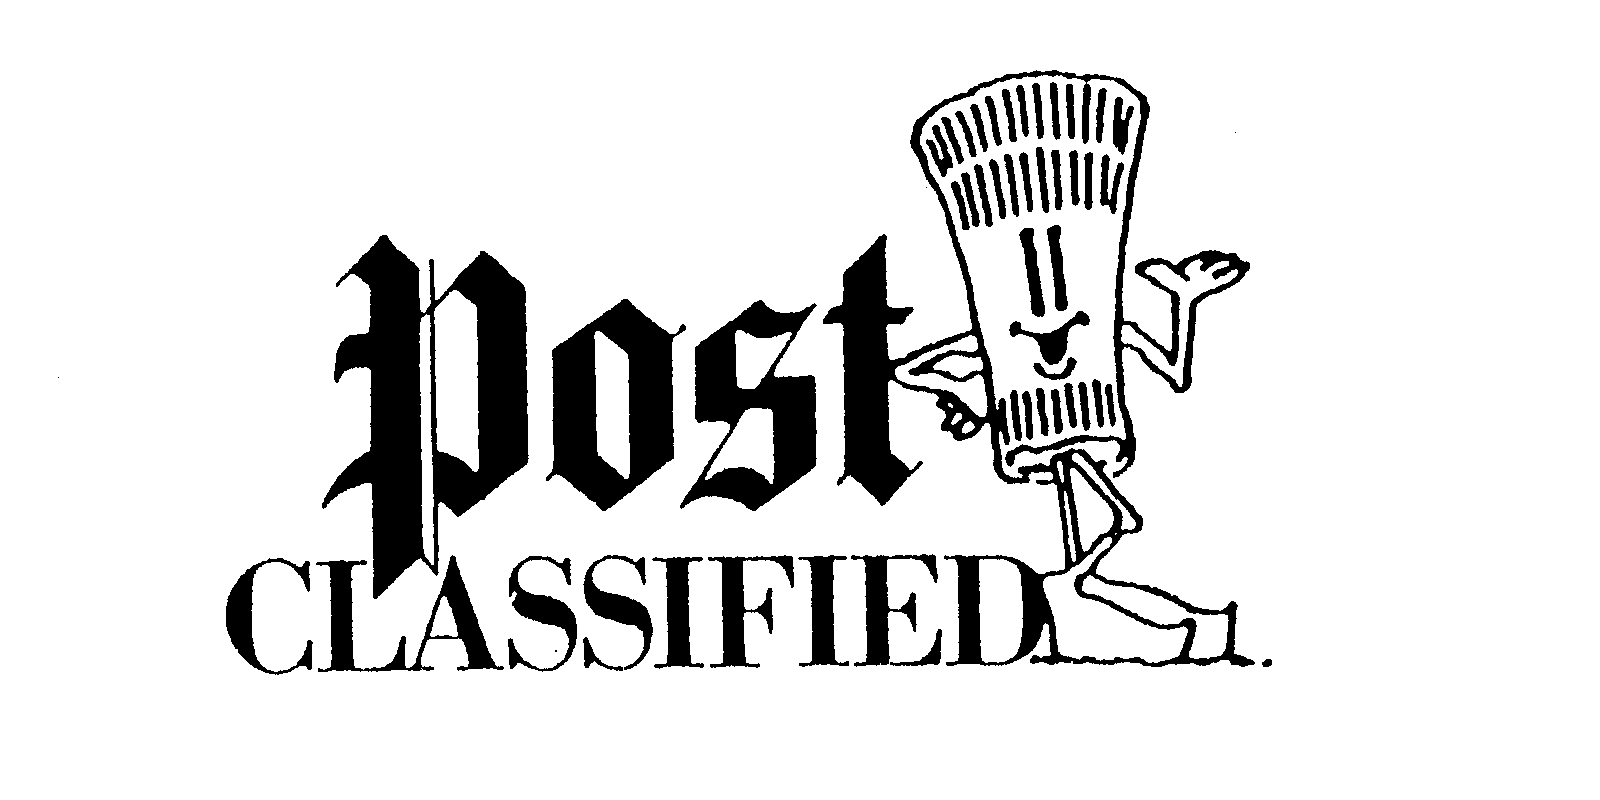  POST CLASSIFIED